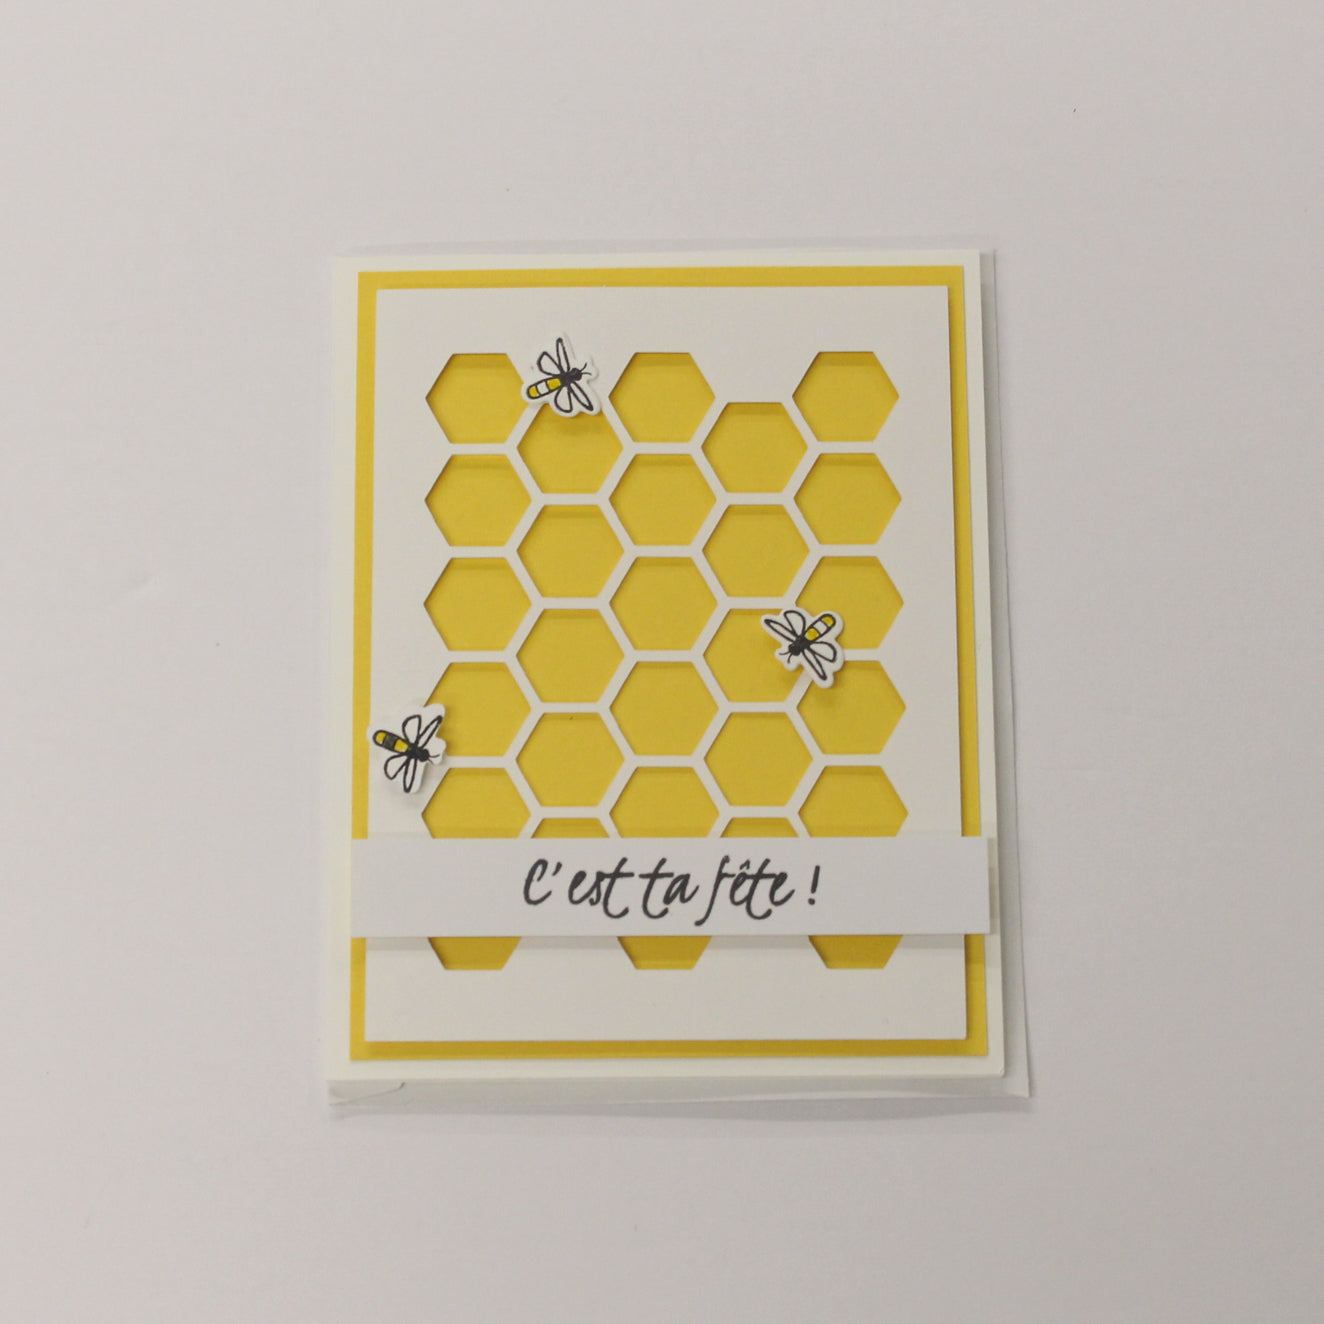 Honeycomb birthday card that says it's your birthday in French